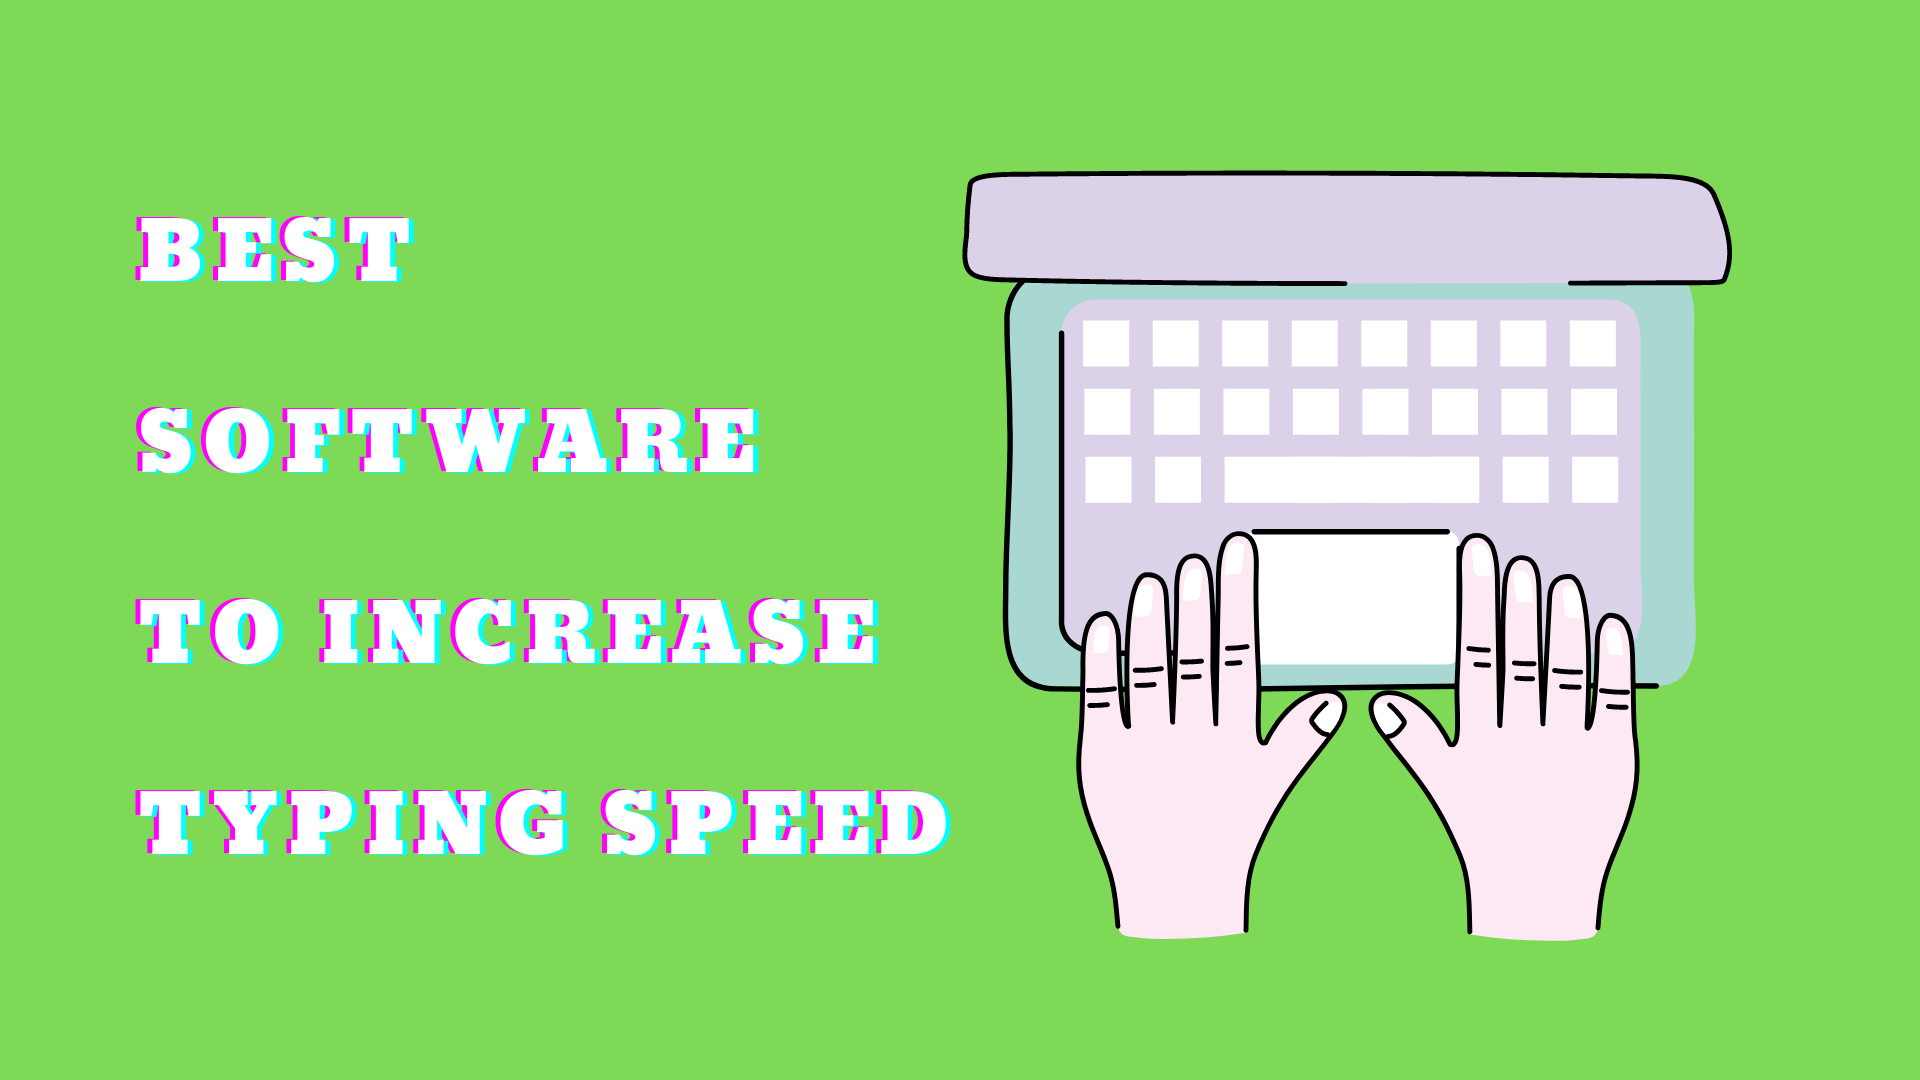 Best Software to Increase Typing Speed